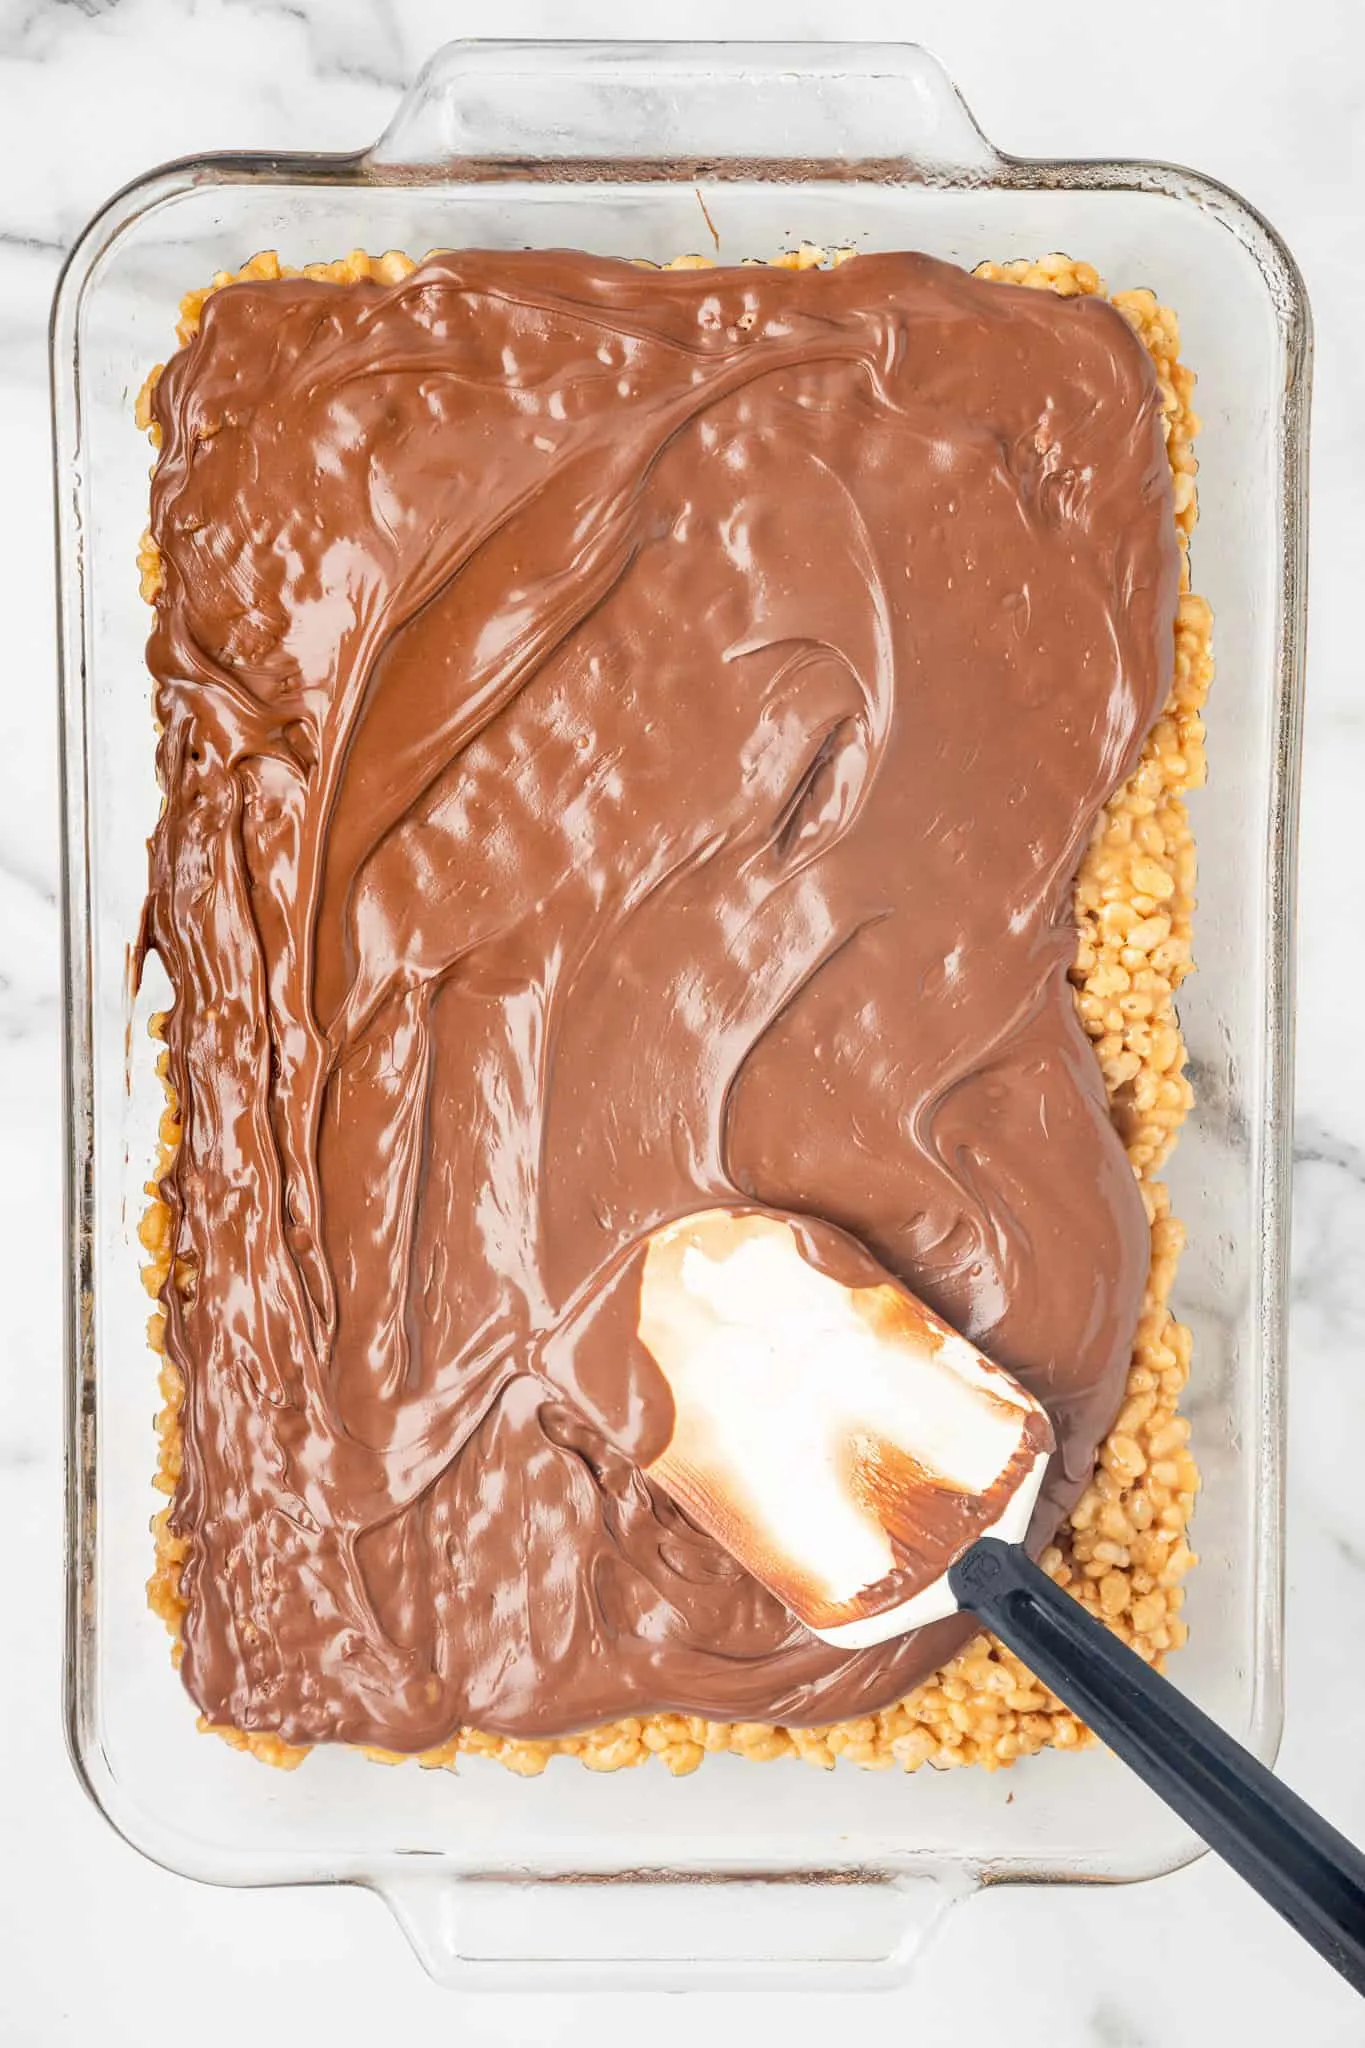 spreading melted chocolate and butterscotch mixture over peanut butter rice krispies in a baking dish